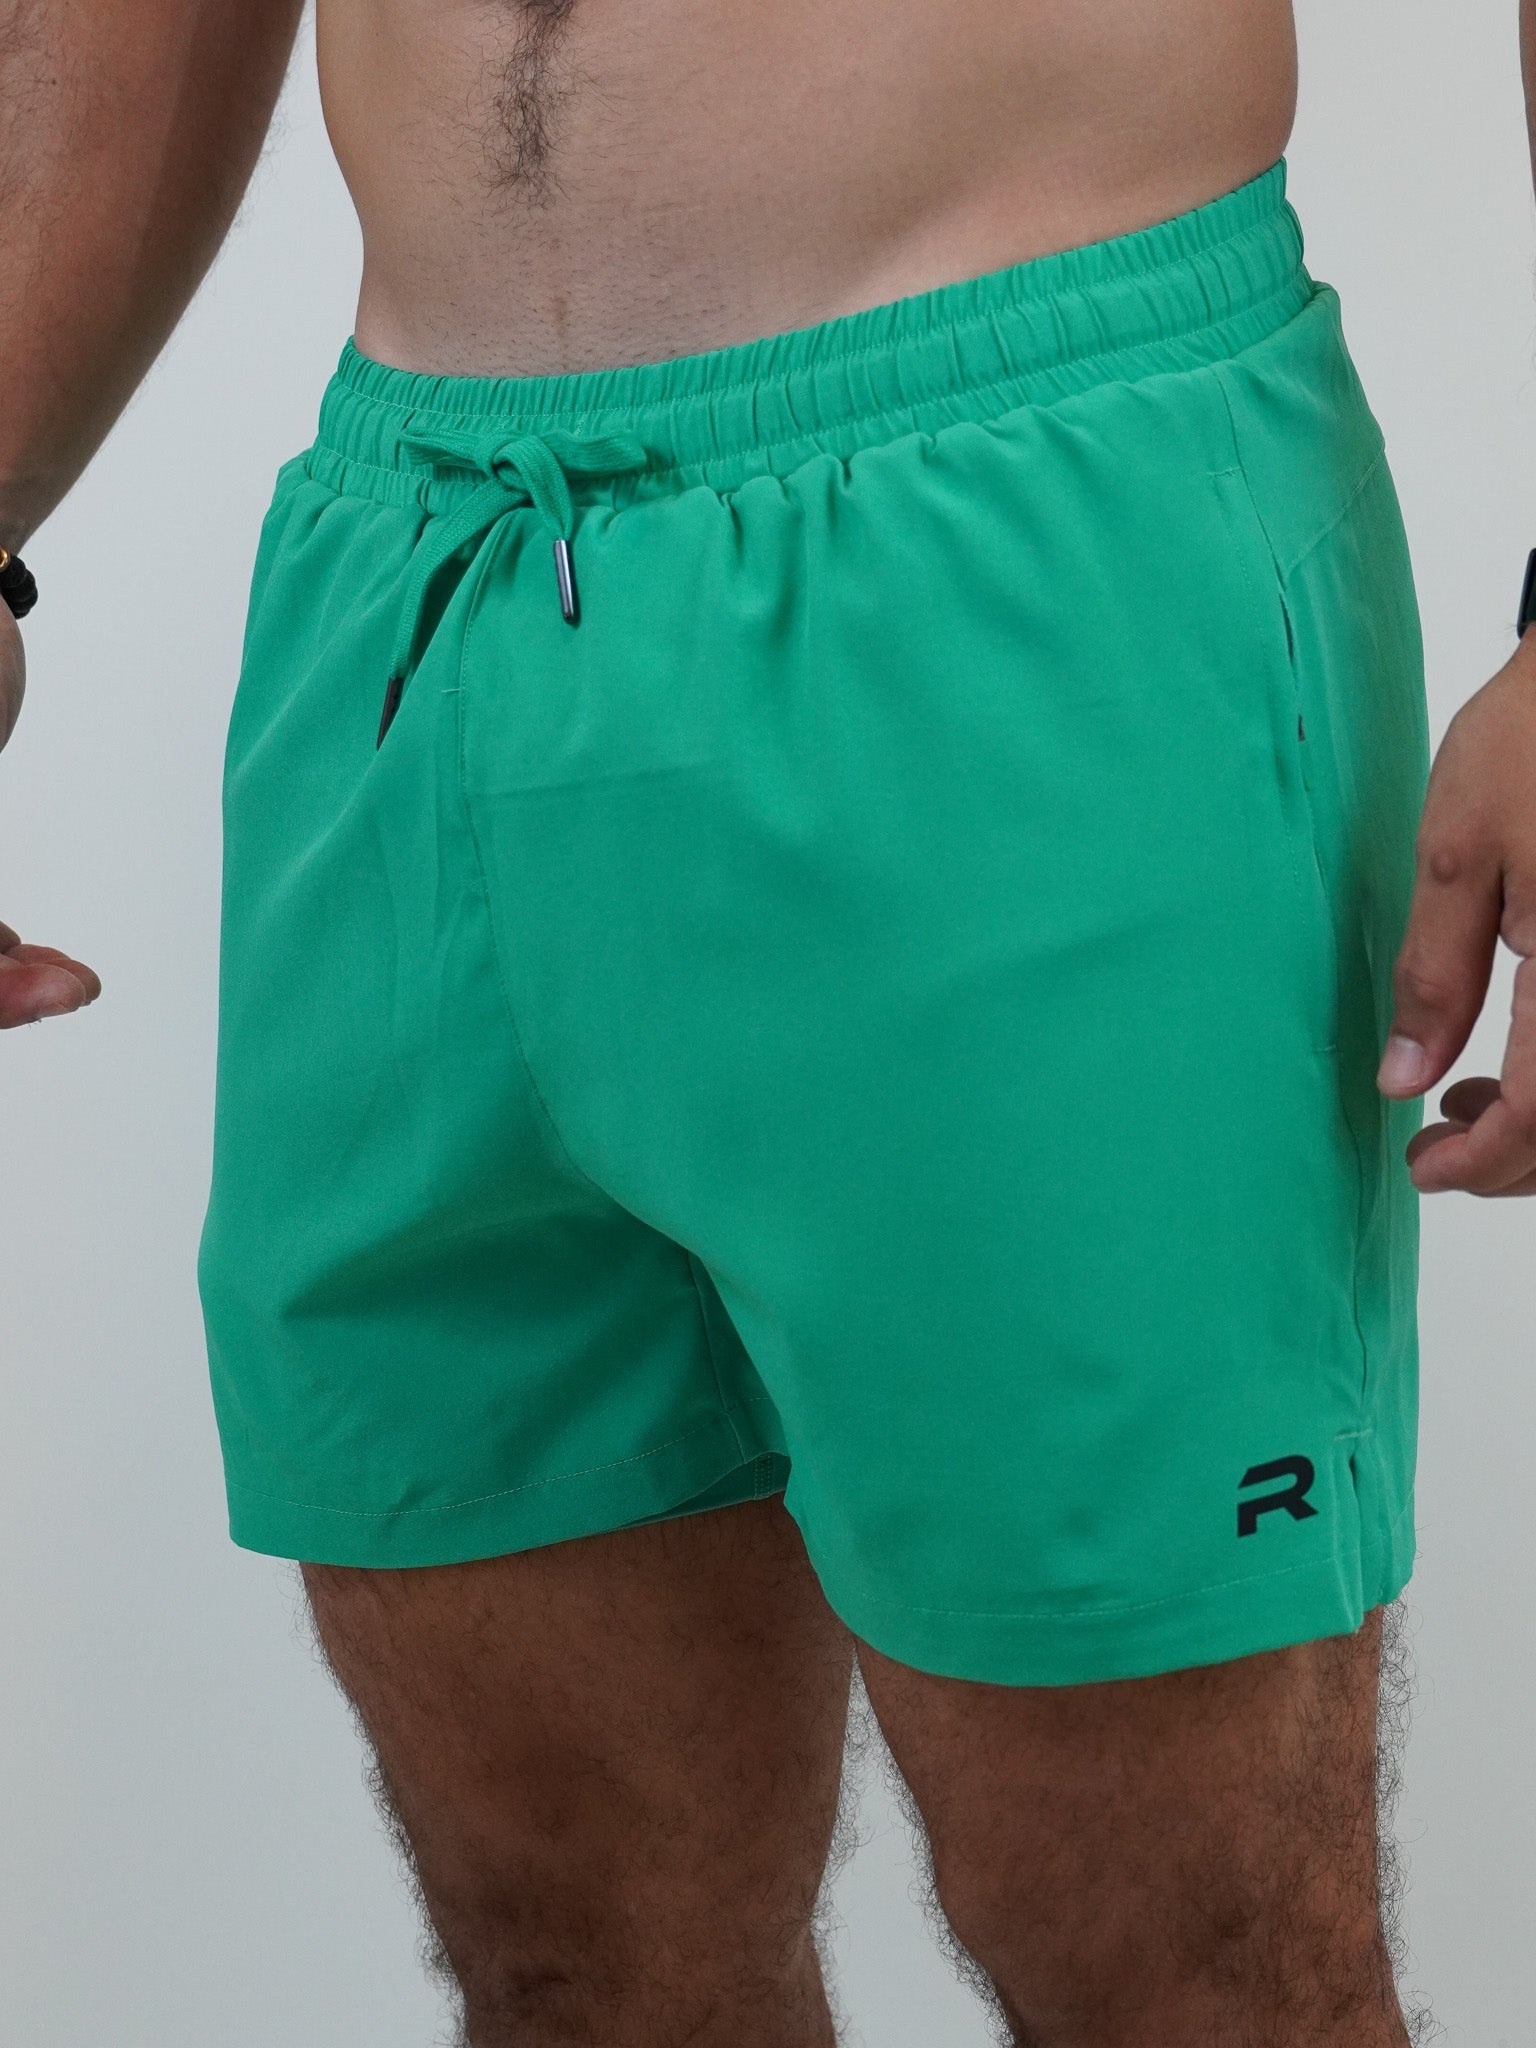 Peak 2 in 1 Shorts - Resilient Active